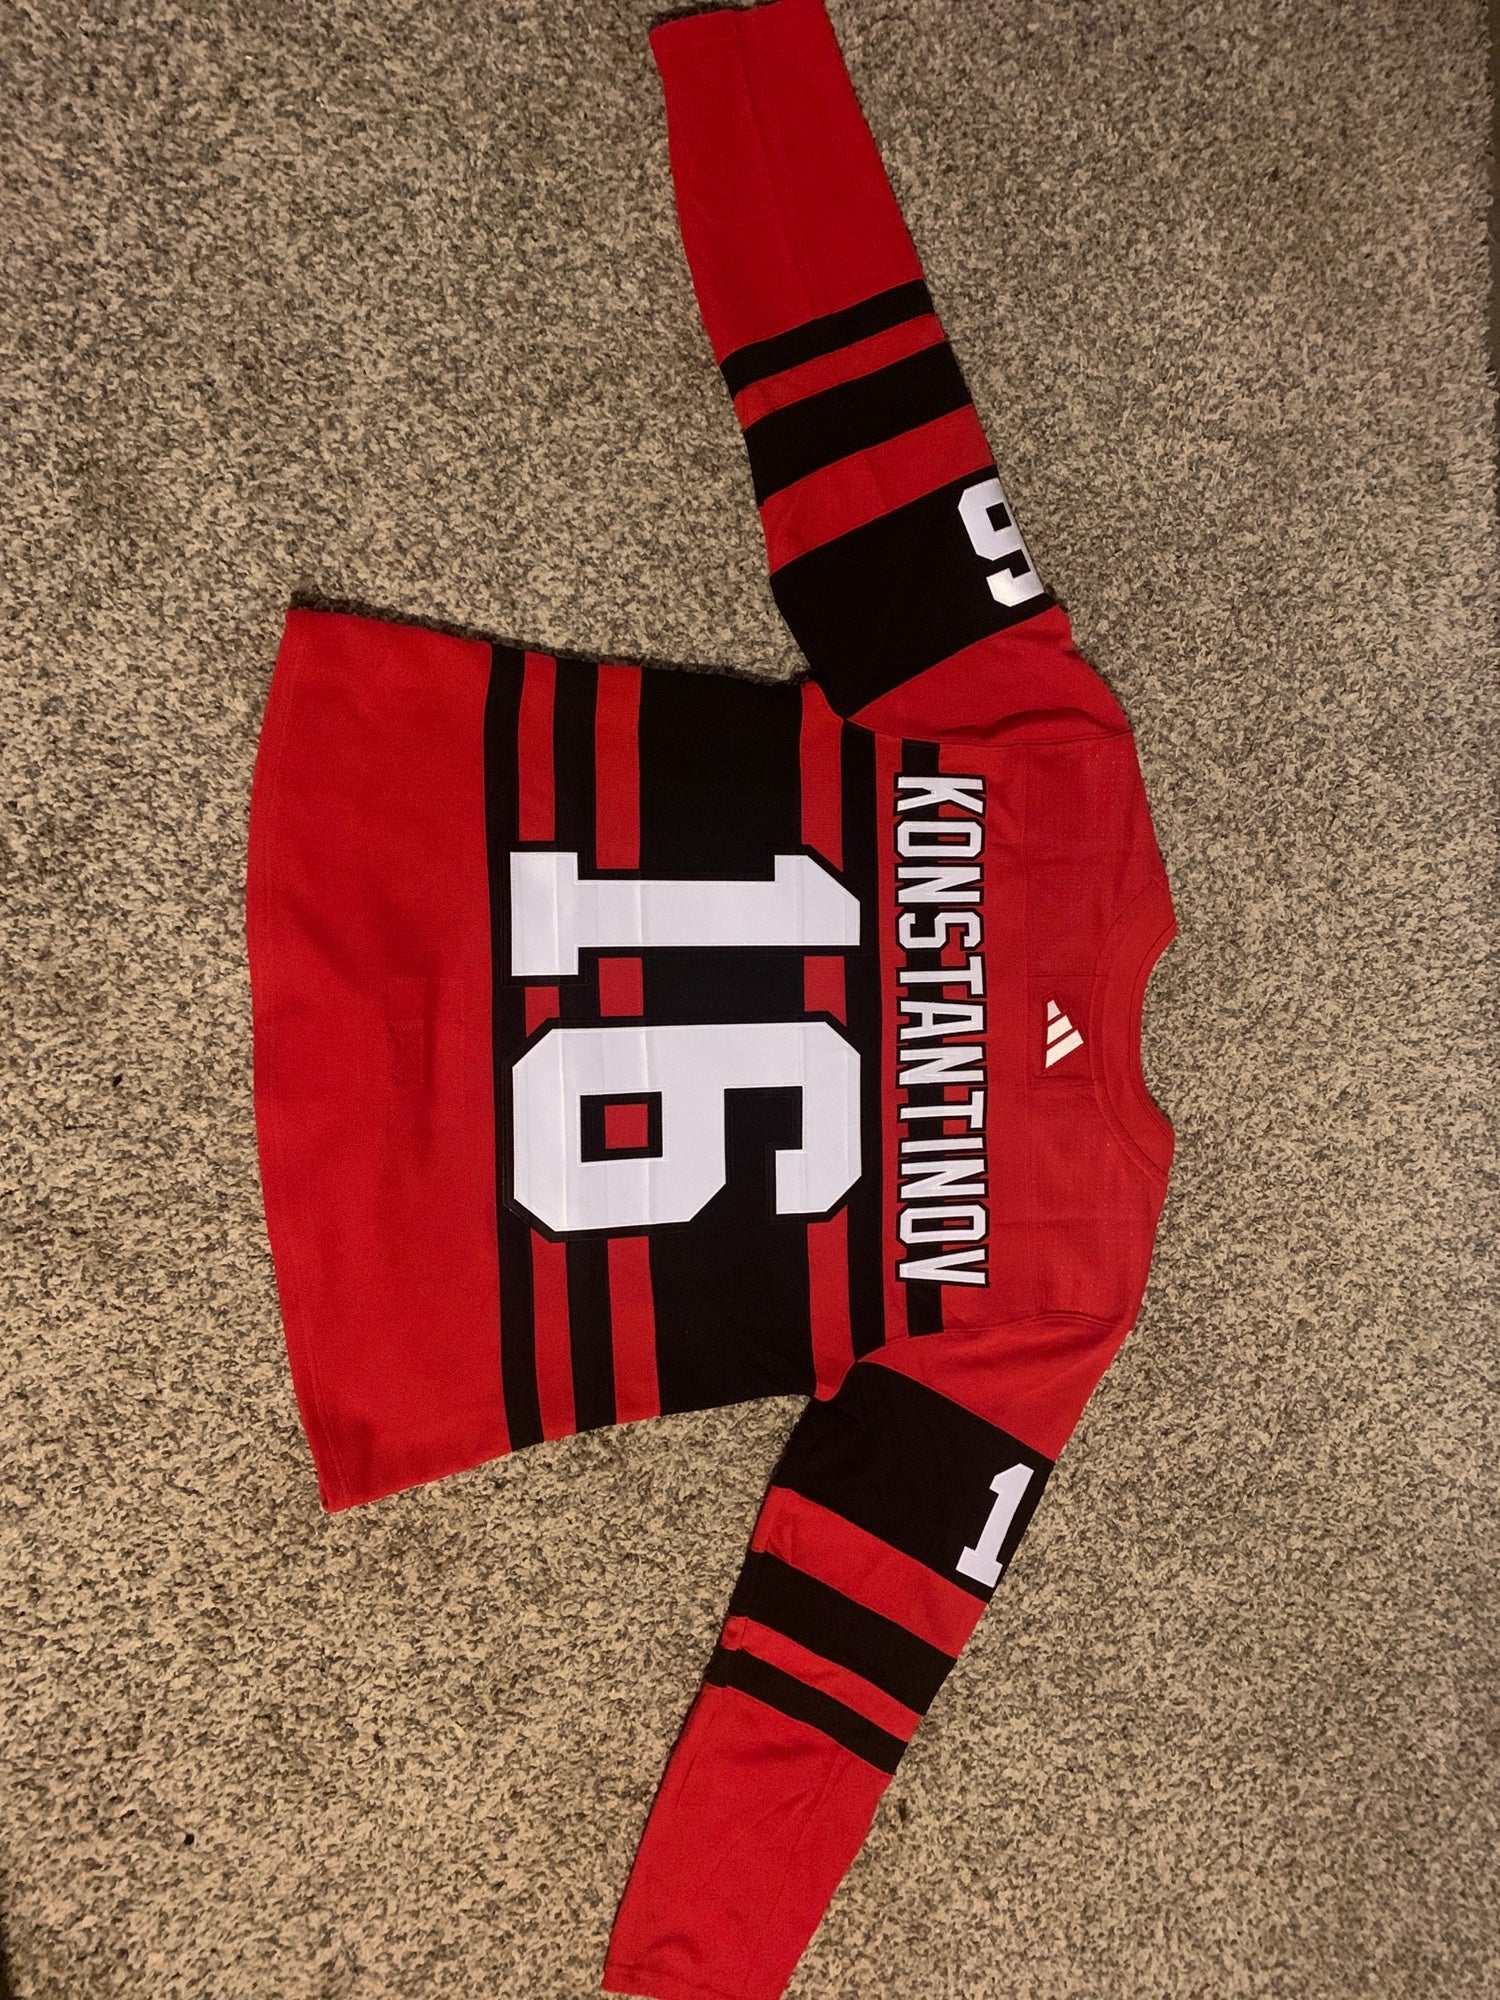 Per u/TravisPerry's request, a fix on the Red Wings RR Jersey with a  Konstantinov patch! : r/hockey